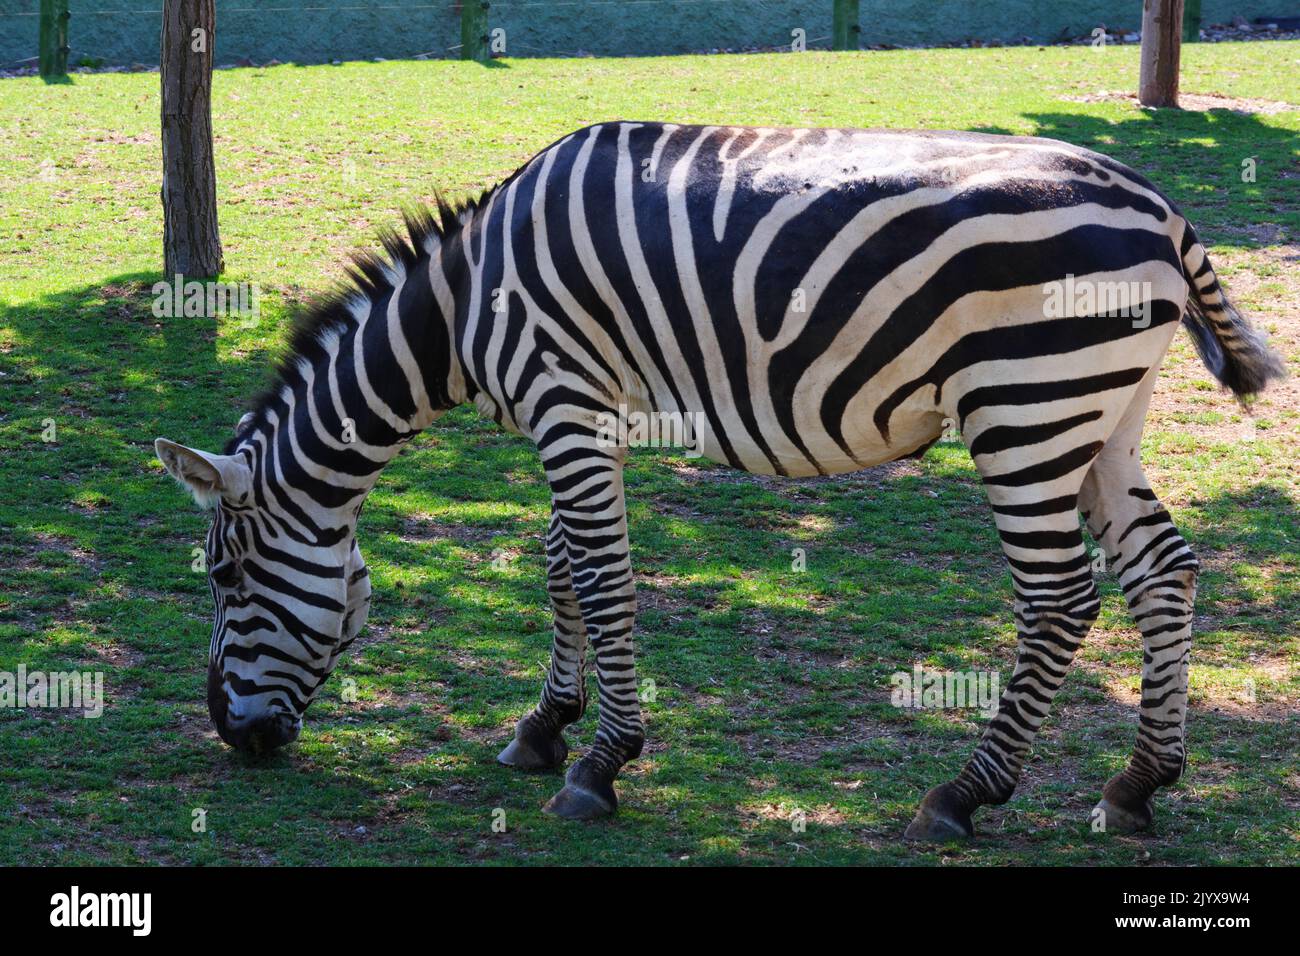 Zebra eating grass outdoor in a sunny summer day Stock Photo